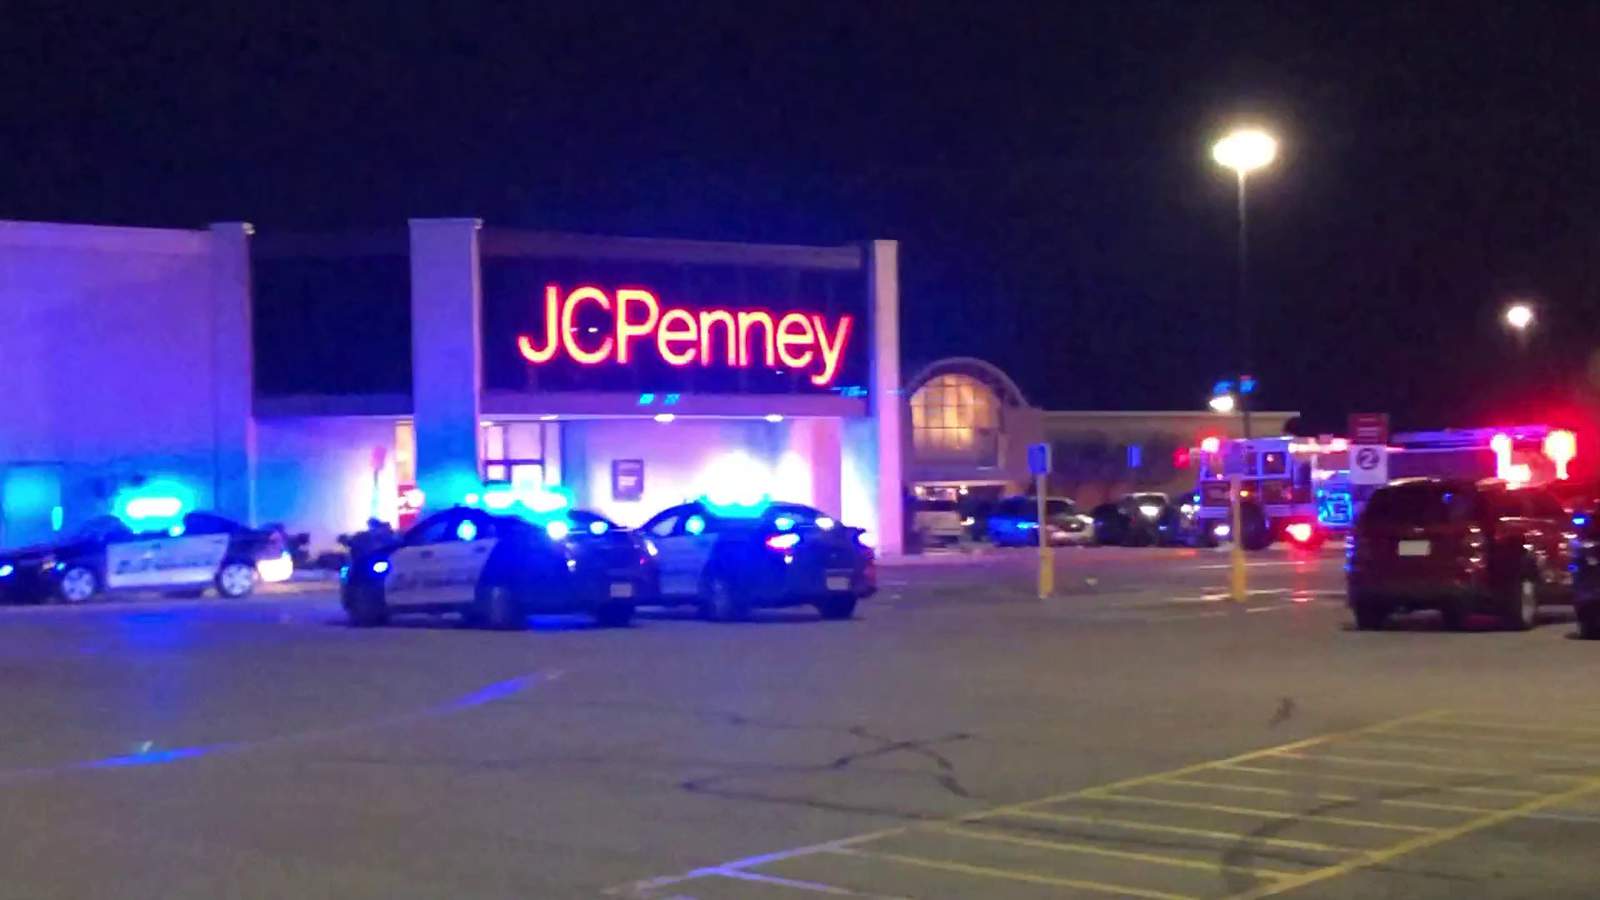 Major police presence investigating incident at Valley View Mall in Roanoke